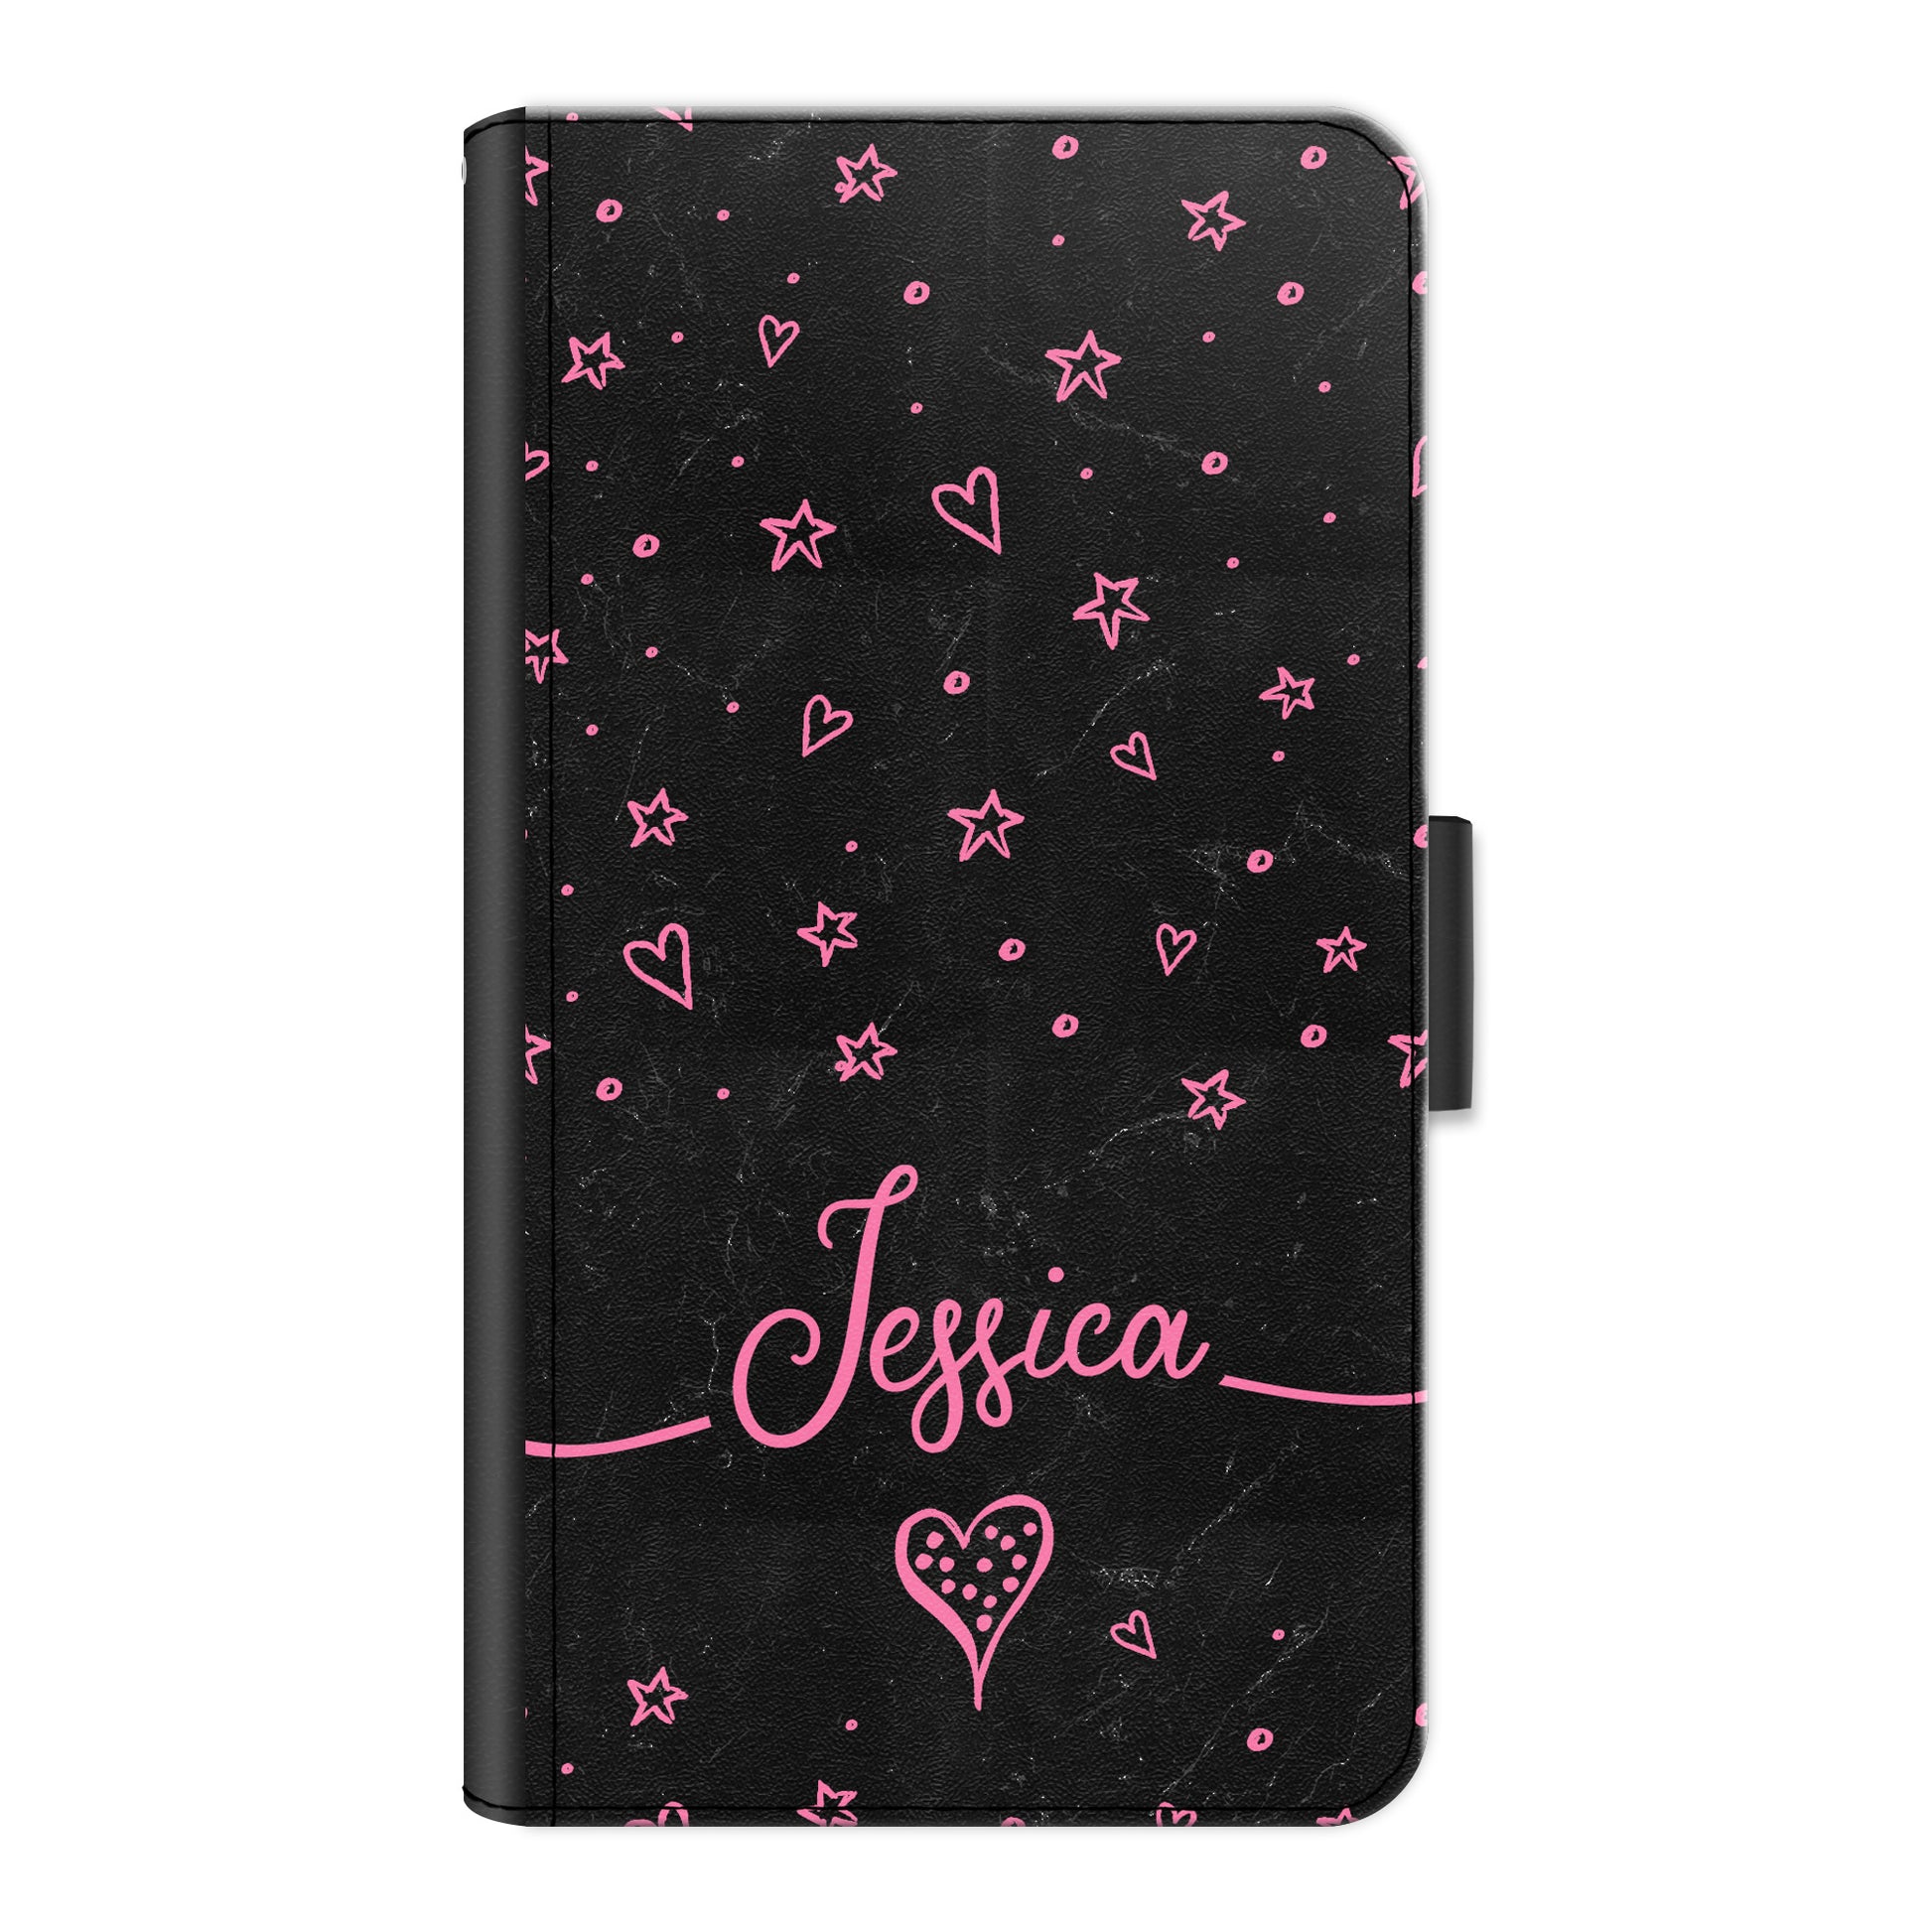 Personalised Motorola Phone Leather Wallet with Pink Stylish text, Stars and Hearts on Black Marble